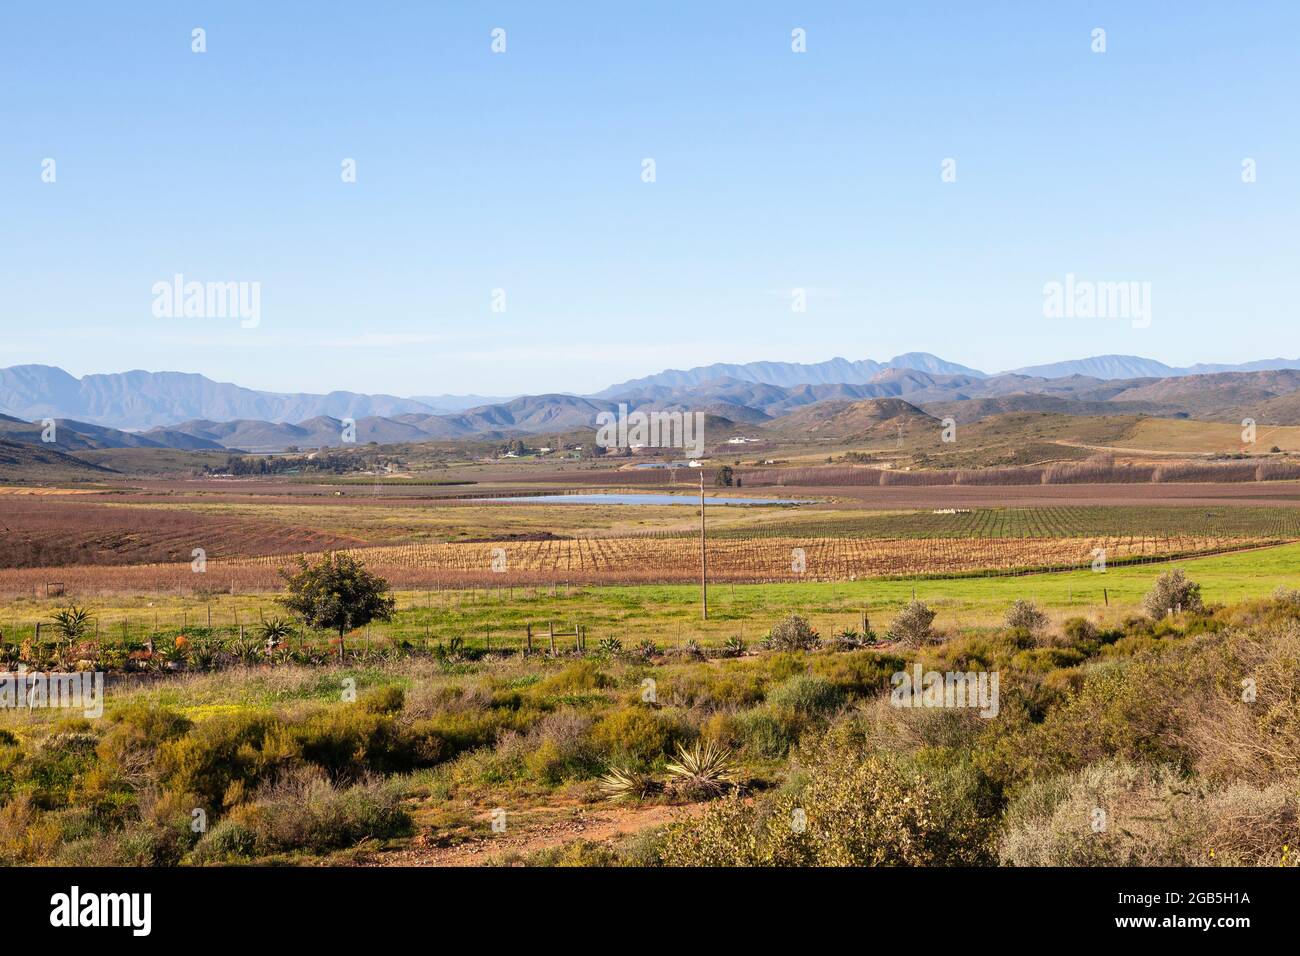 Vineyards in the Mcgregor Valley in  winter with a view to the Langeberg Mountains, Western Cape Winelands, South Africa Stock Photo